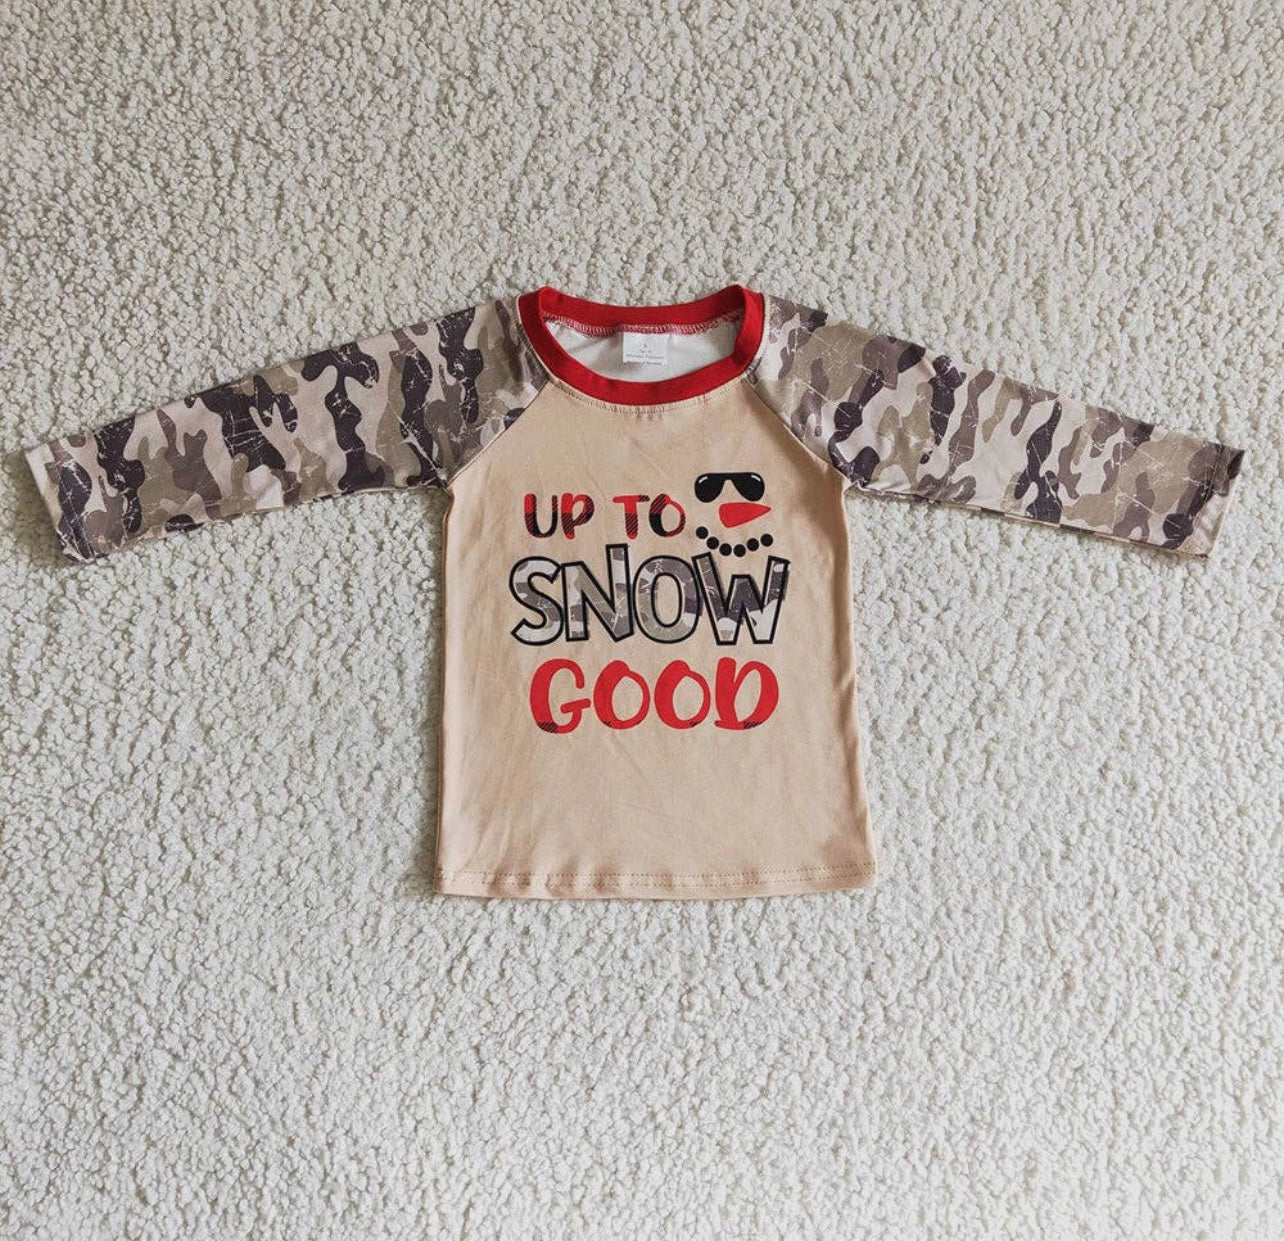 Up to snow good long sleeve